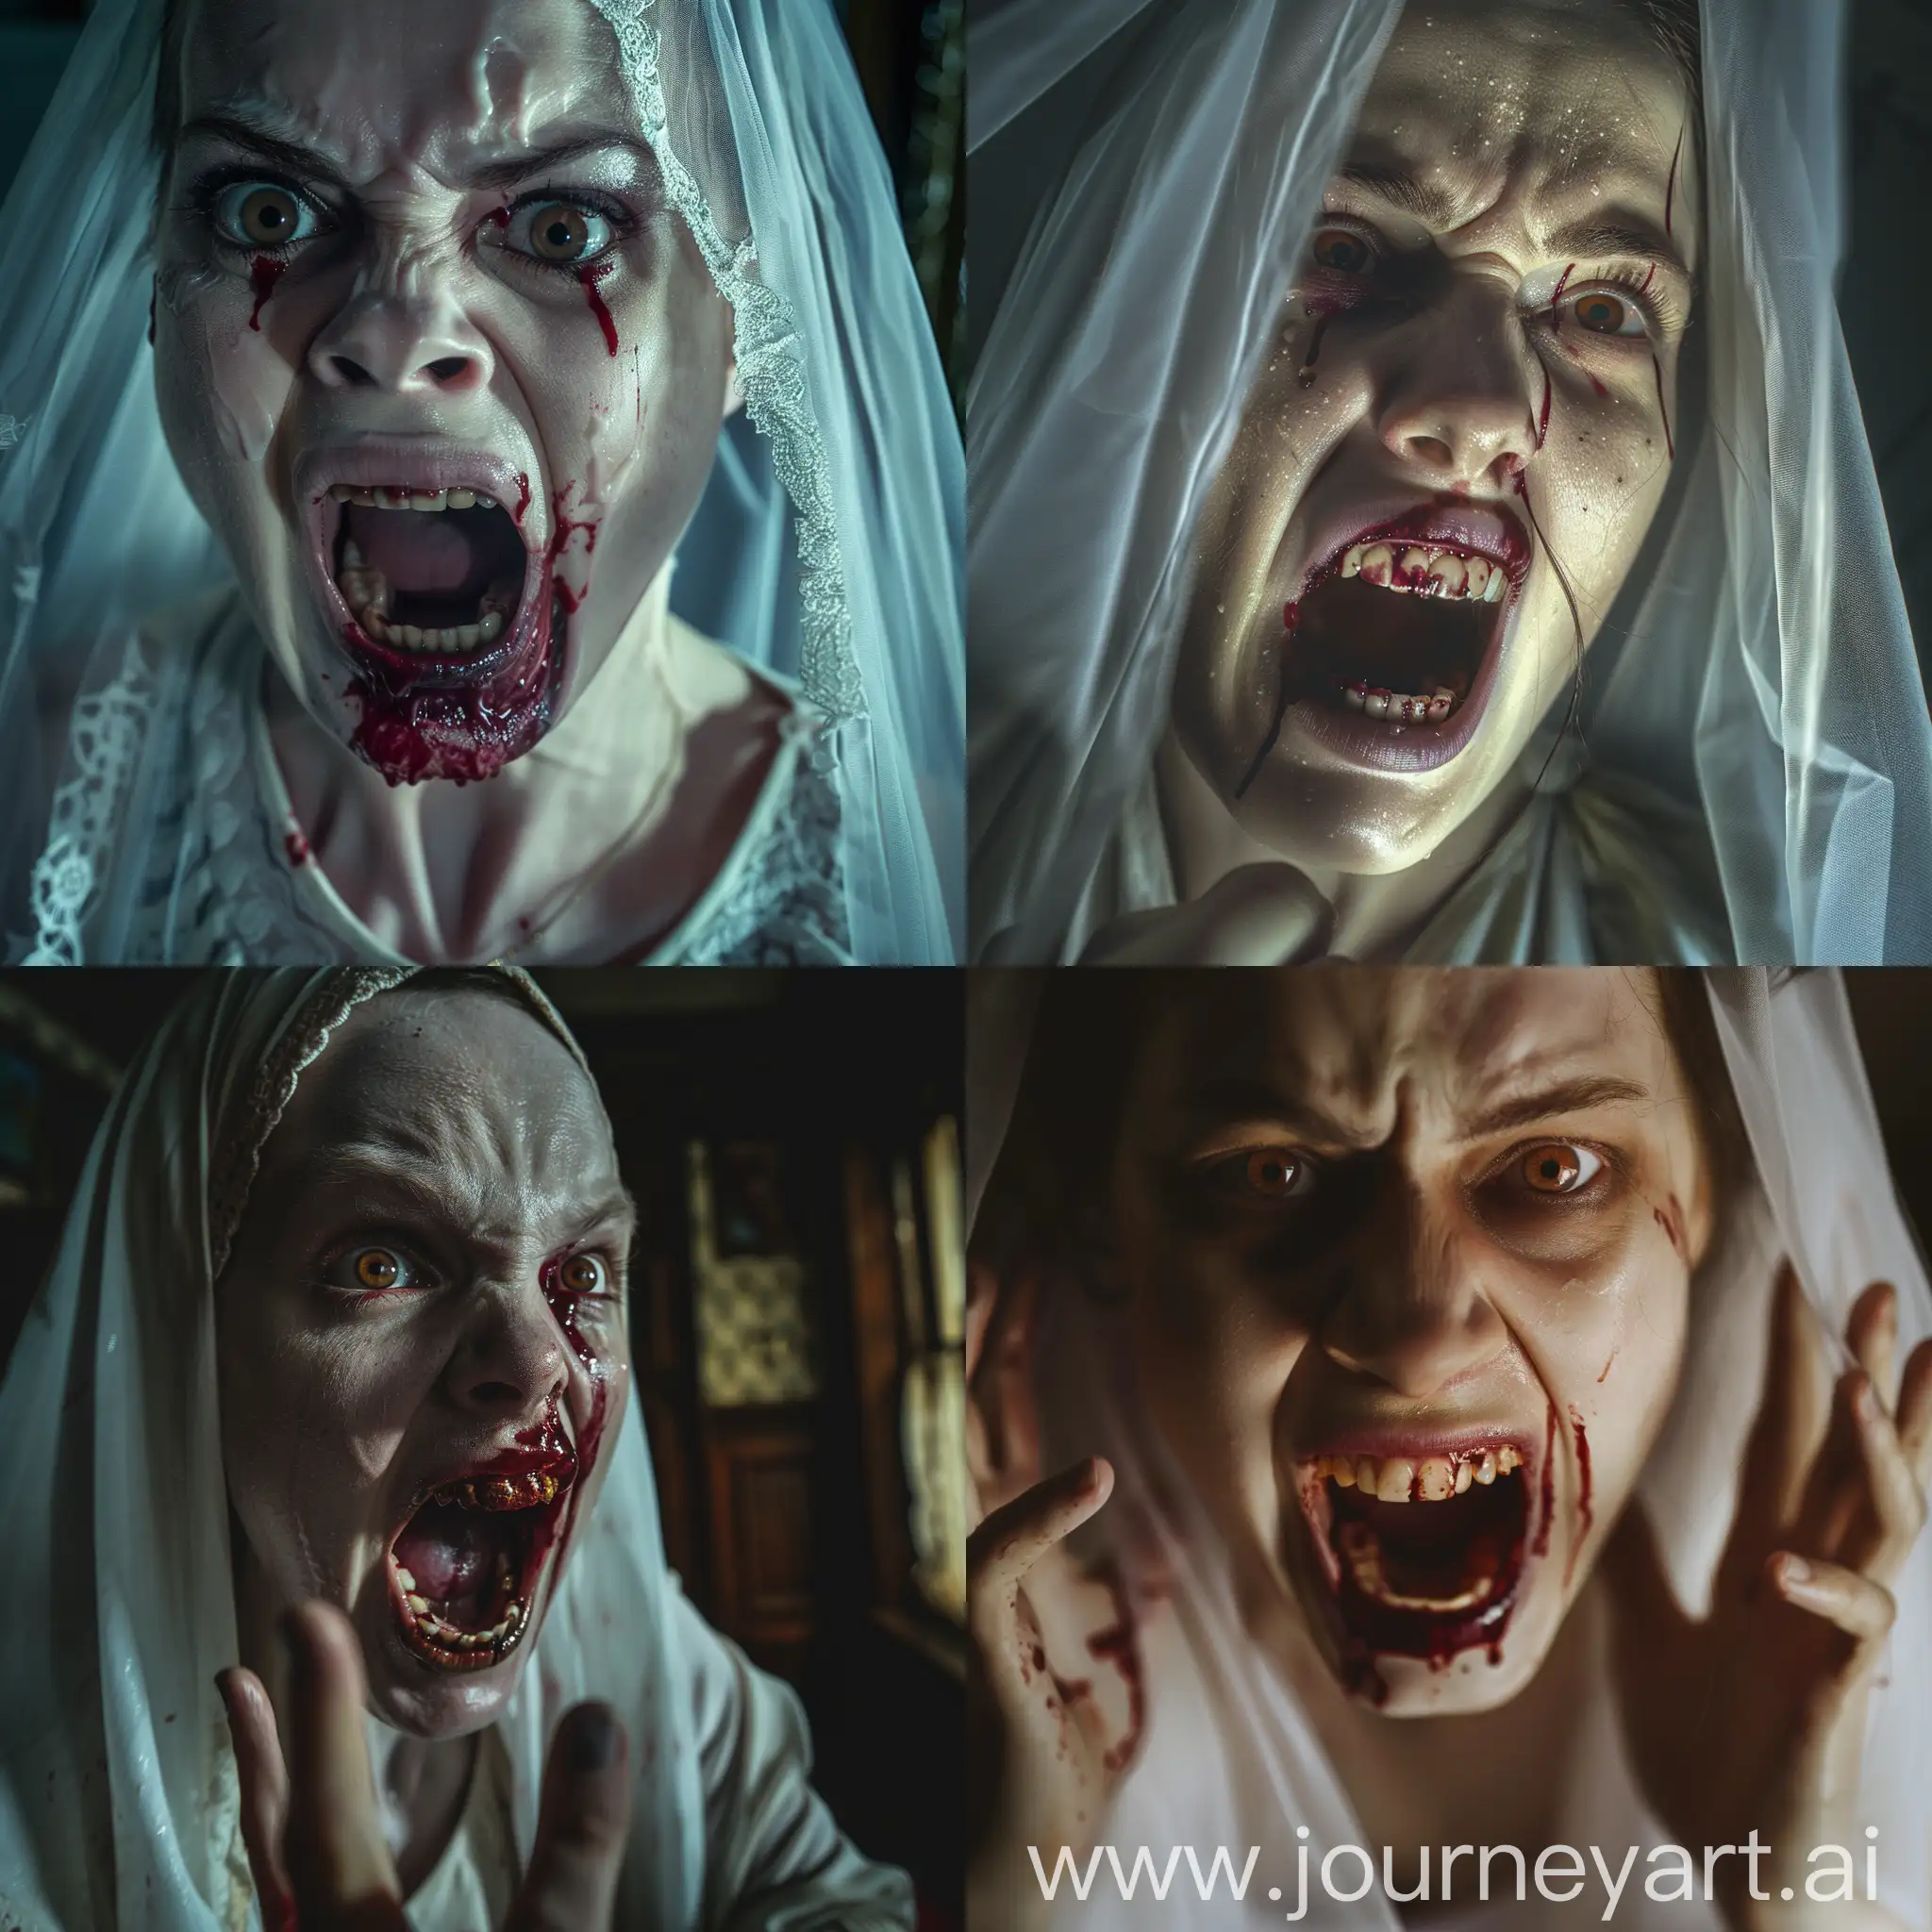 Gothic-Horror-Portrait-Pale-Woman-Crying-Blood-with-Veil-in-a-Creepy-Home